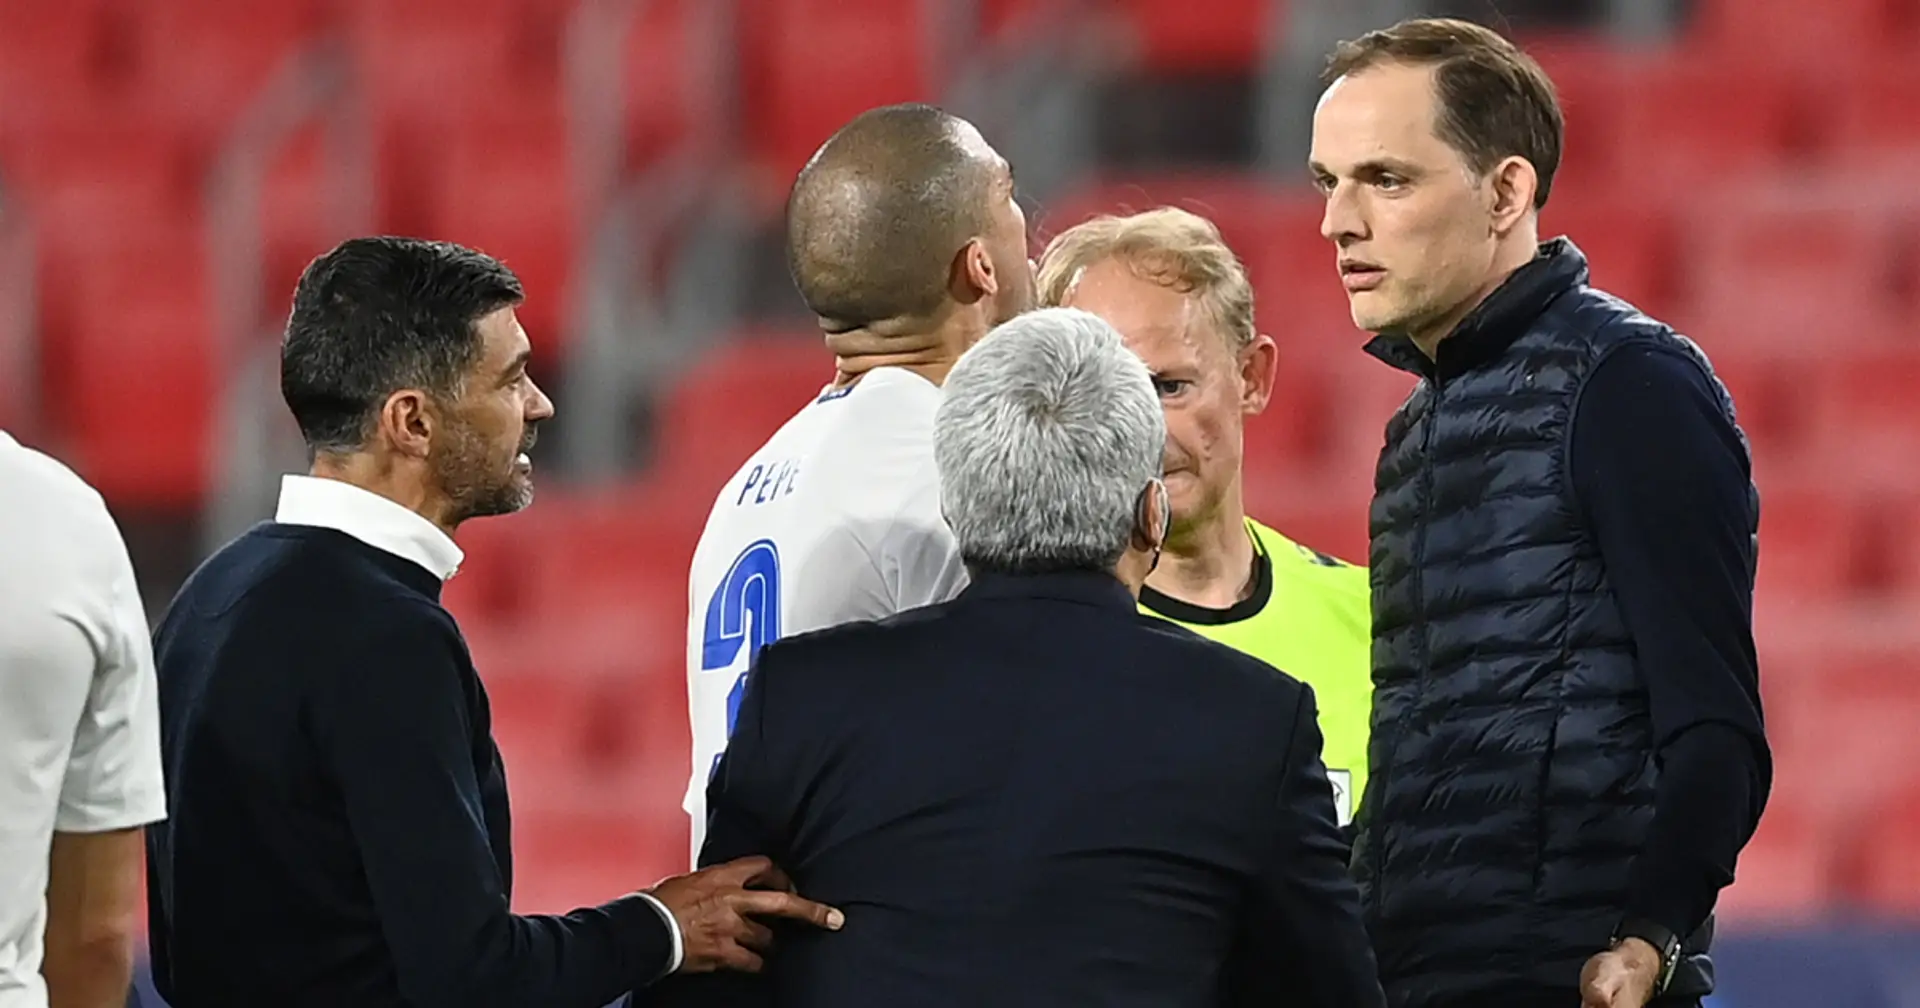 Chelsea deny Tuchel told Conceicao to f*** off, shocked by Porto's X-rated dirty tricks - The Telegraph